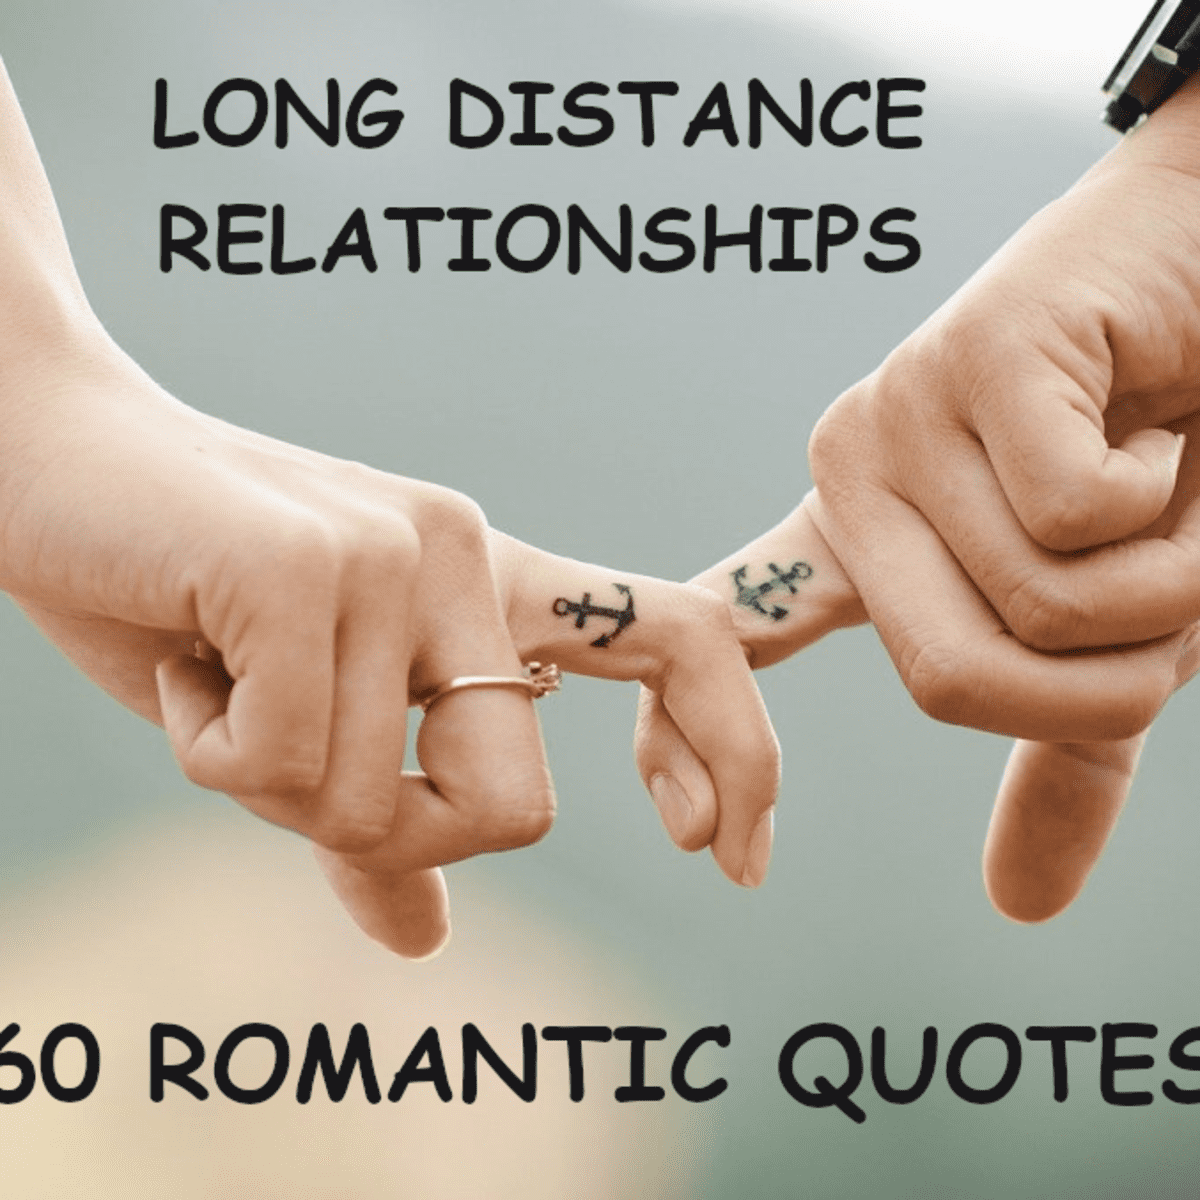 Online long distance dating